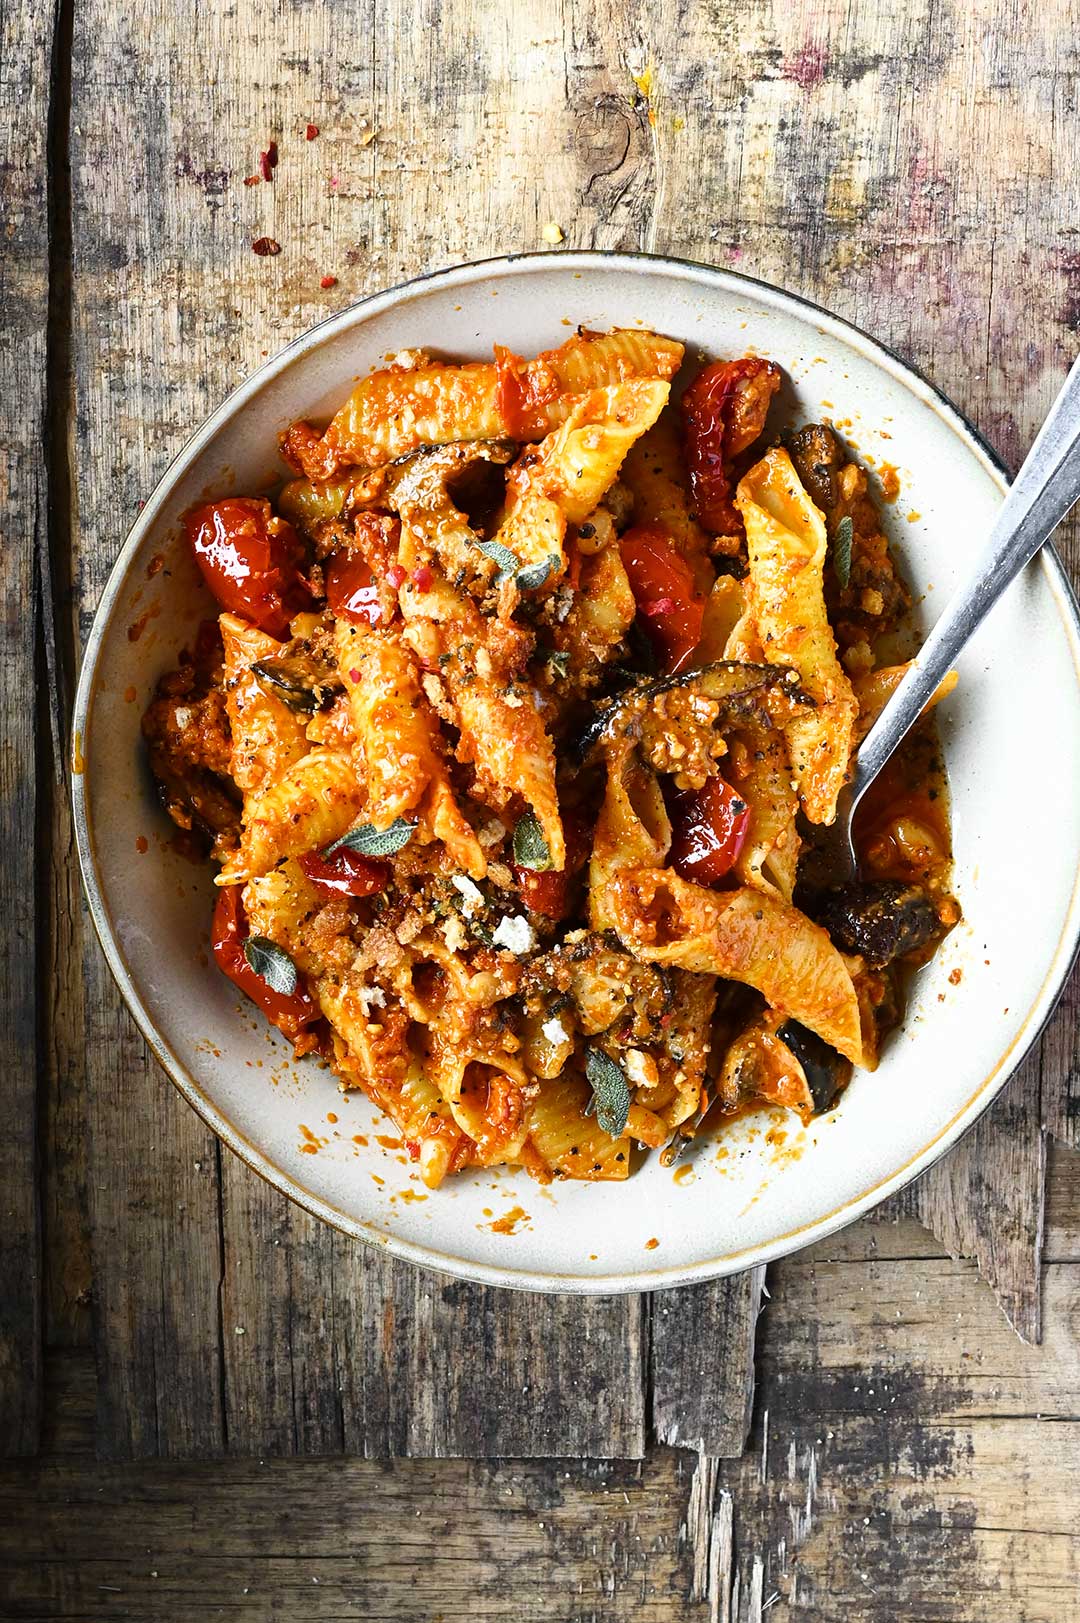 serving dumplings | Red Pesto Pasta with Mushrooms and Sun-dried Tomatoes